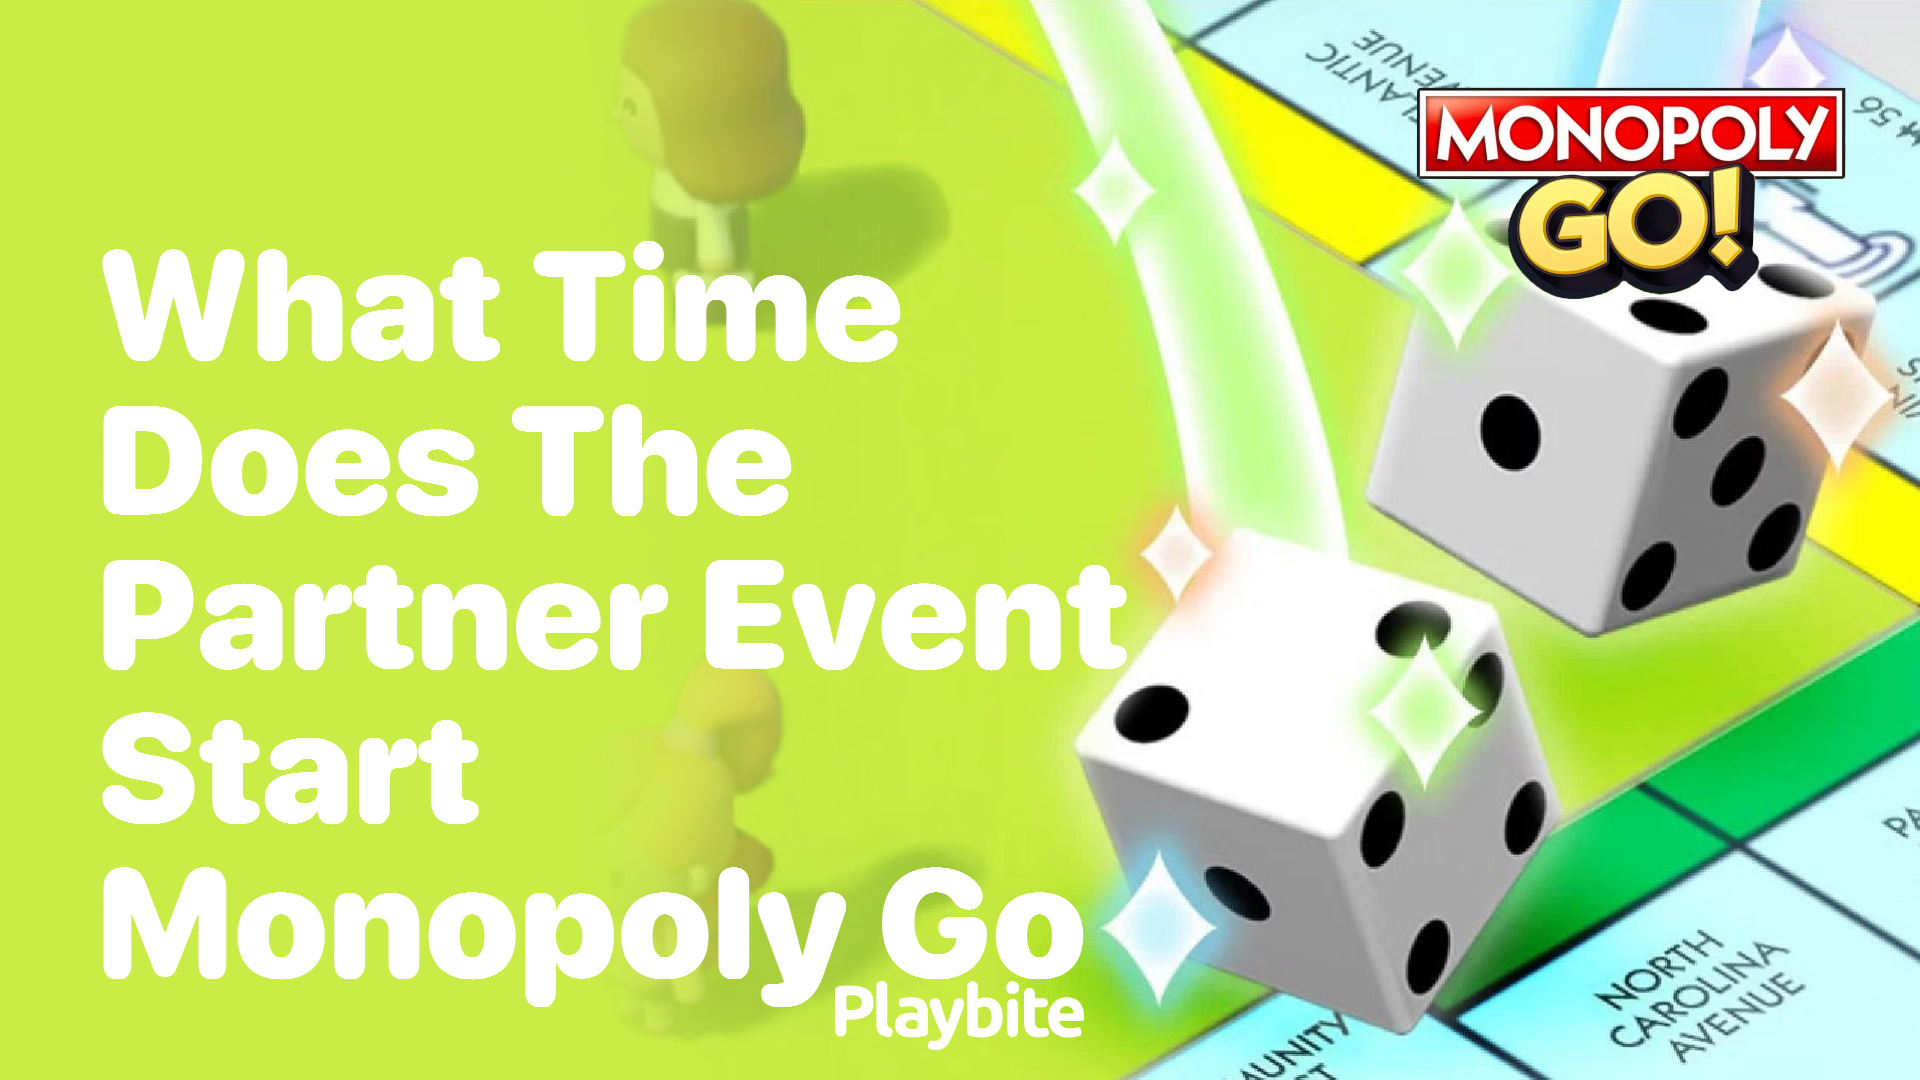 What Time Does the Partner Event Start in Monopoly Go?